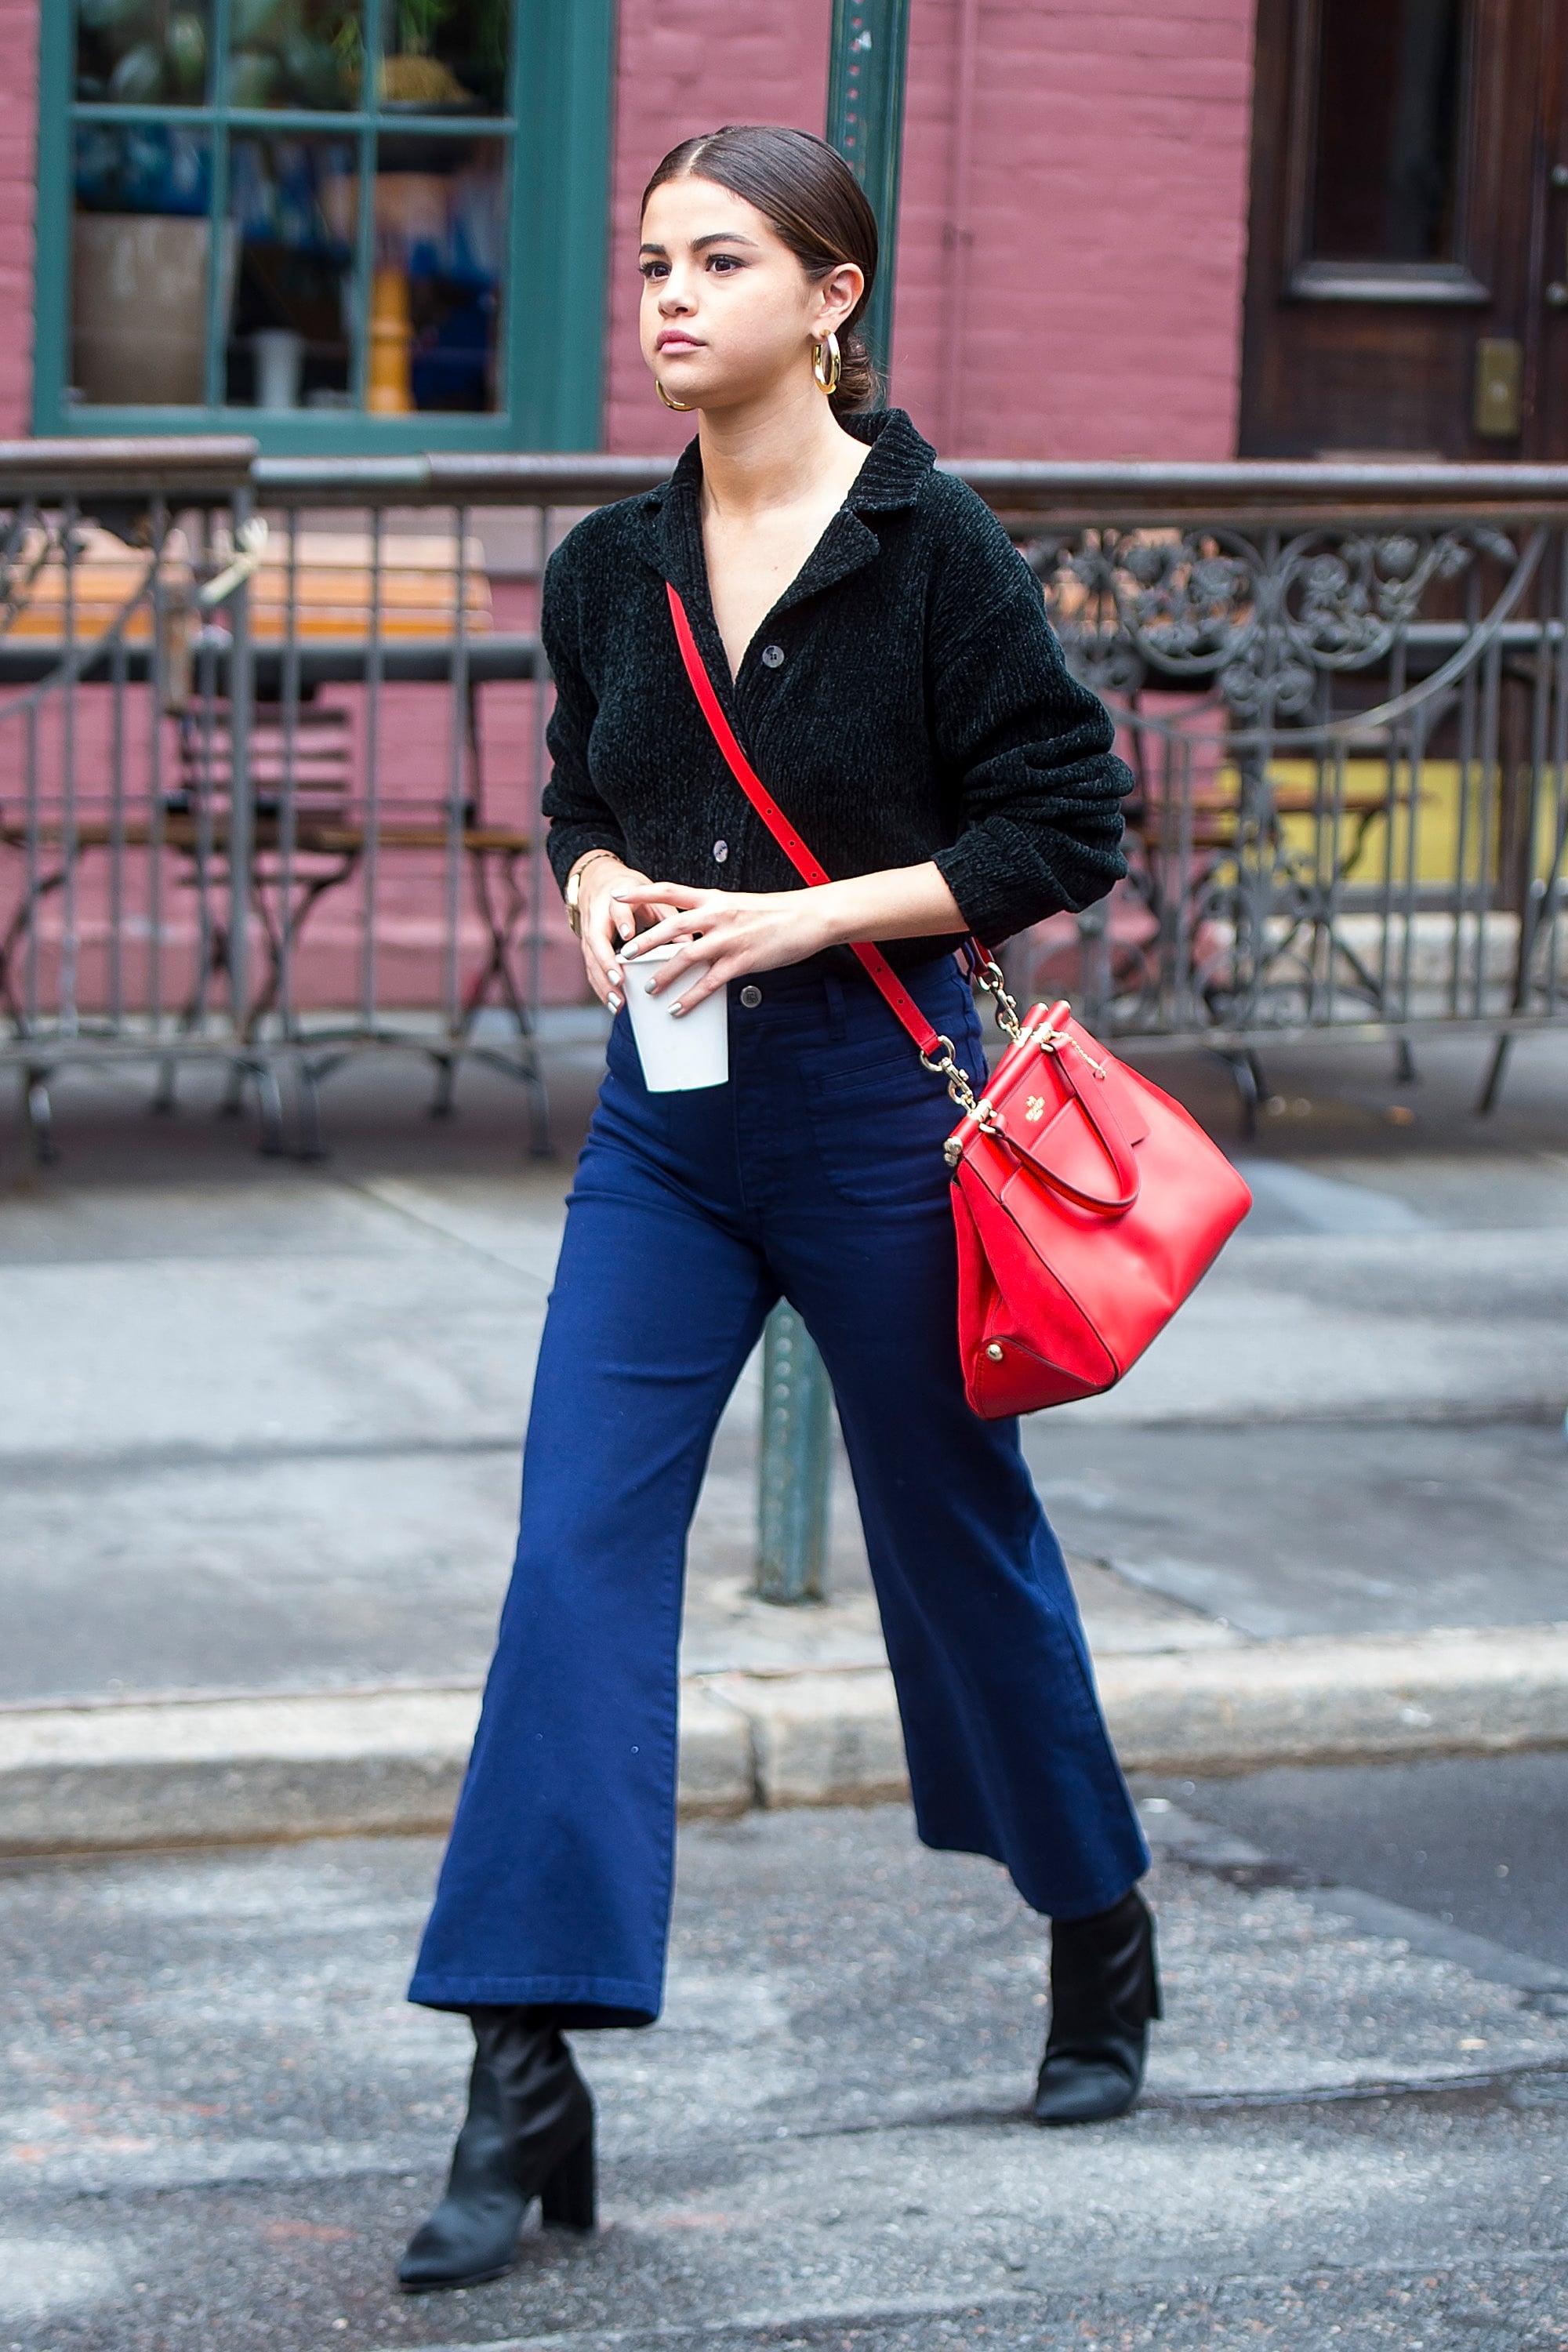 Flare Jeans Are Back: Here's How to Style Them, According to a Stylist